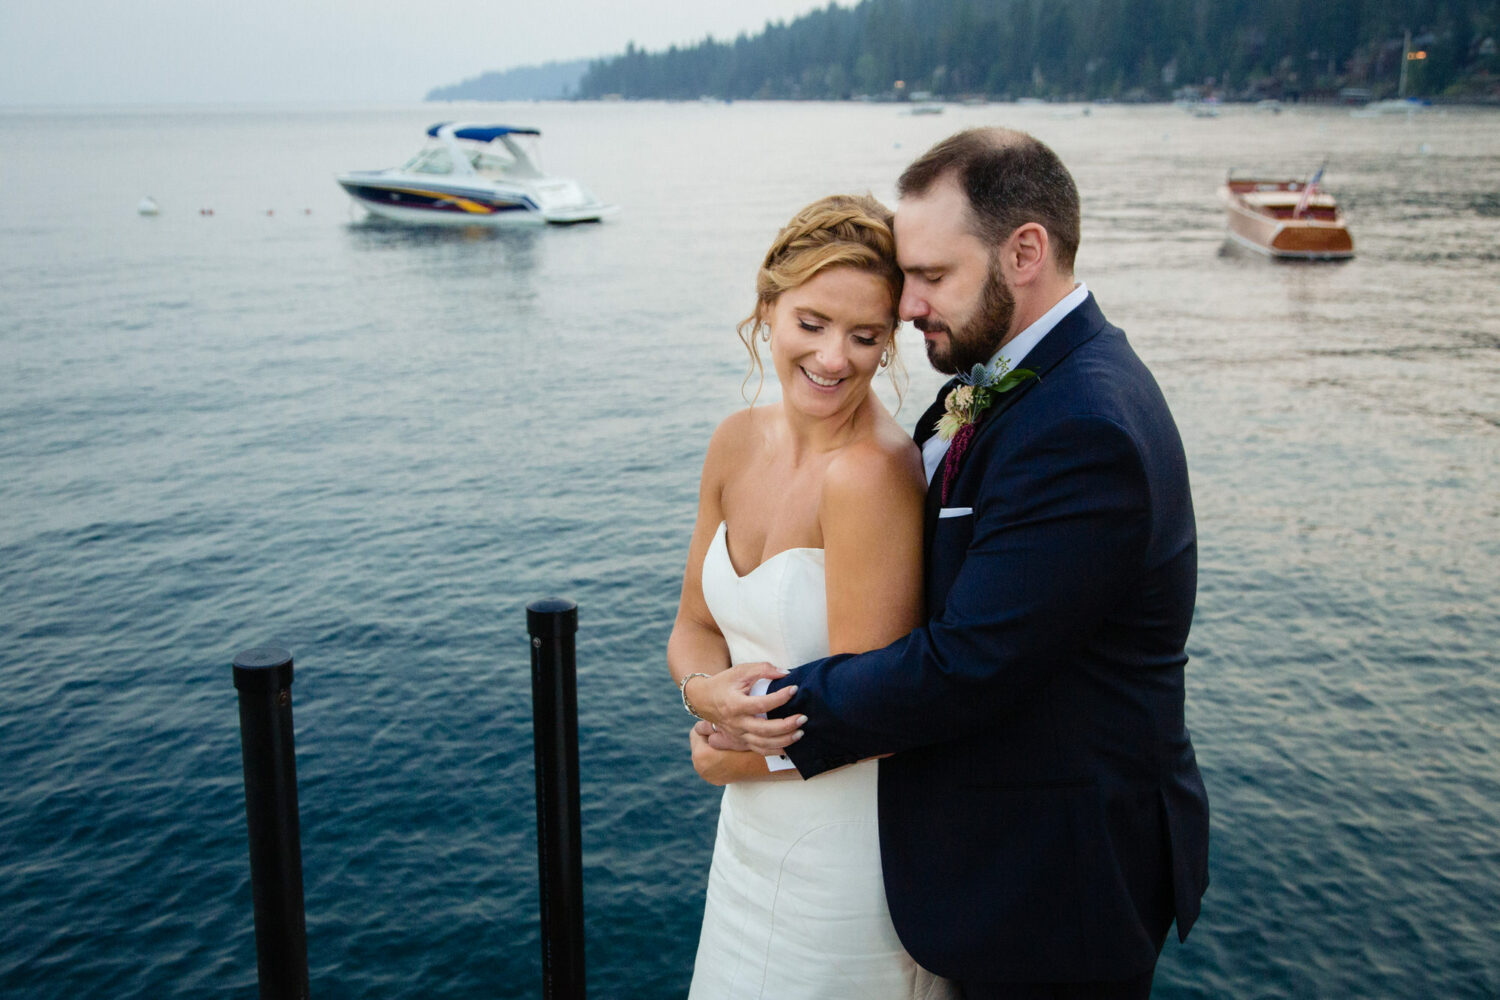 A bride and groom enjoy a romantic moment next to Lake Tahoe at their Gar Woods wedding.